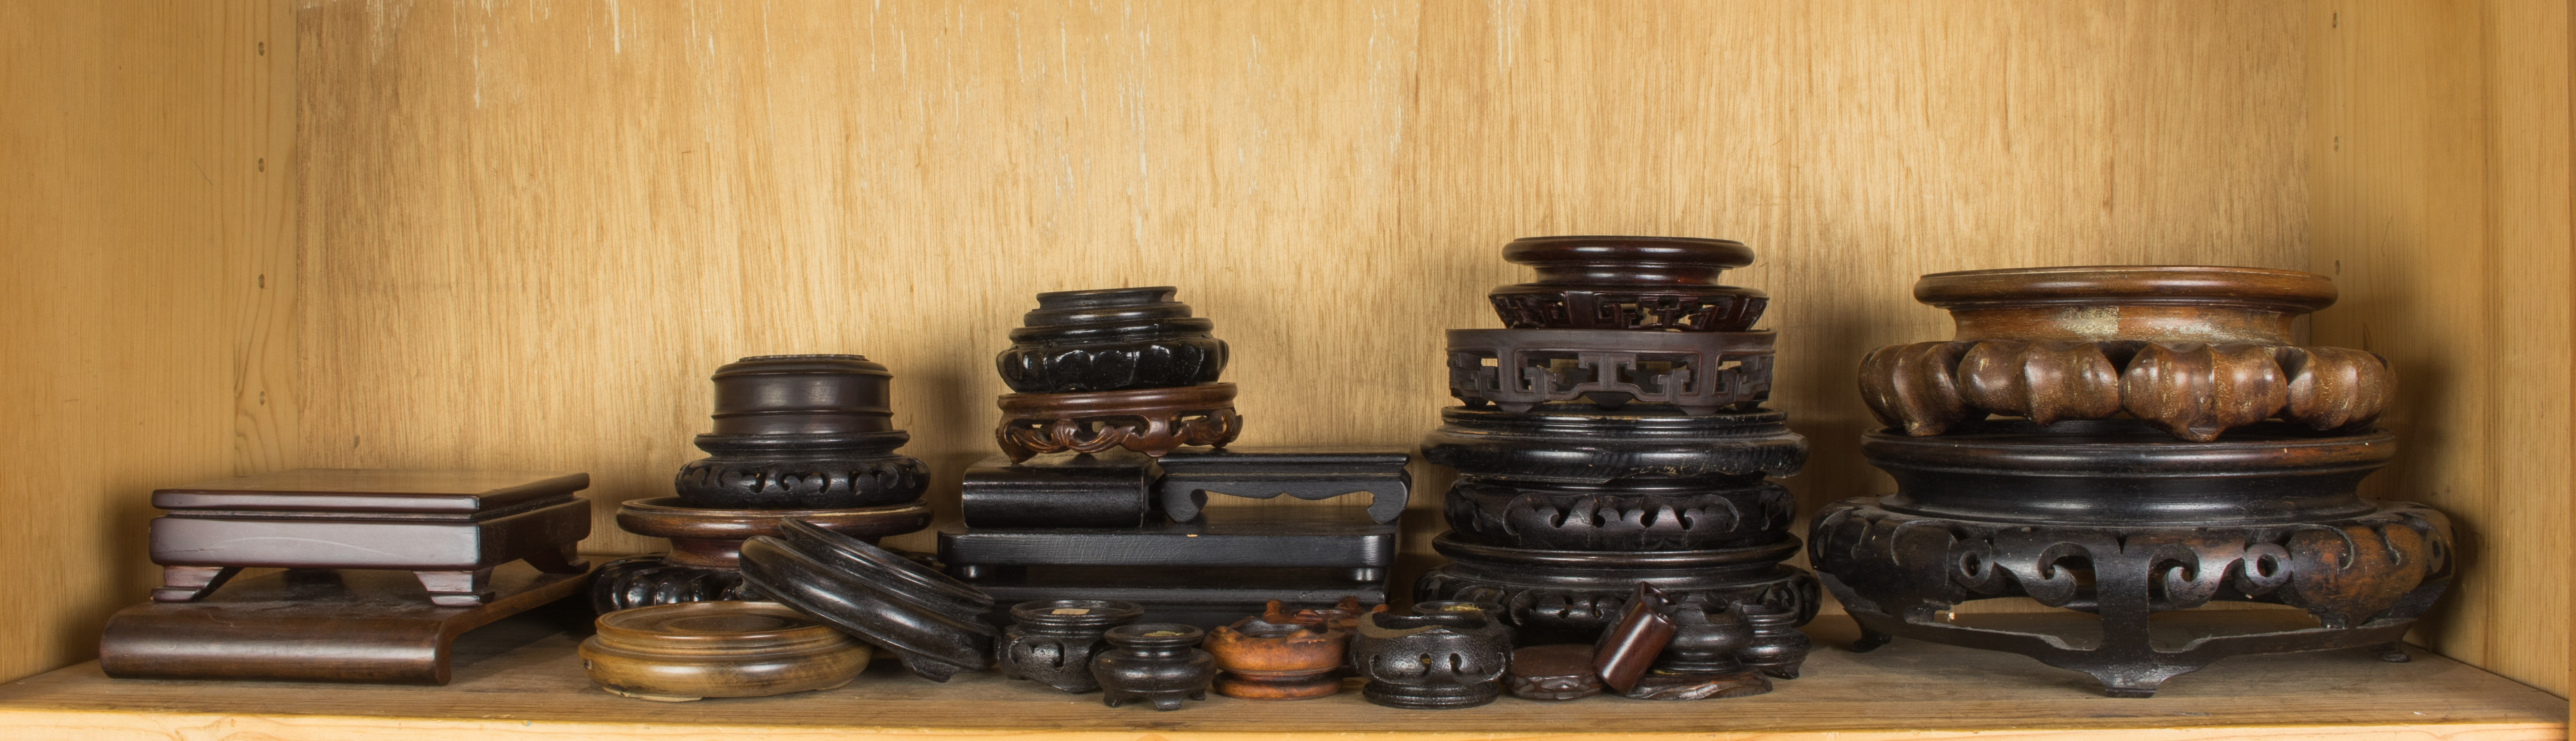 SHELF OF CHINESE WOOD DISPLAY STANDS 3ce4ff